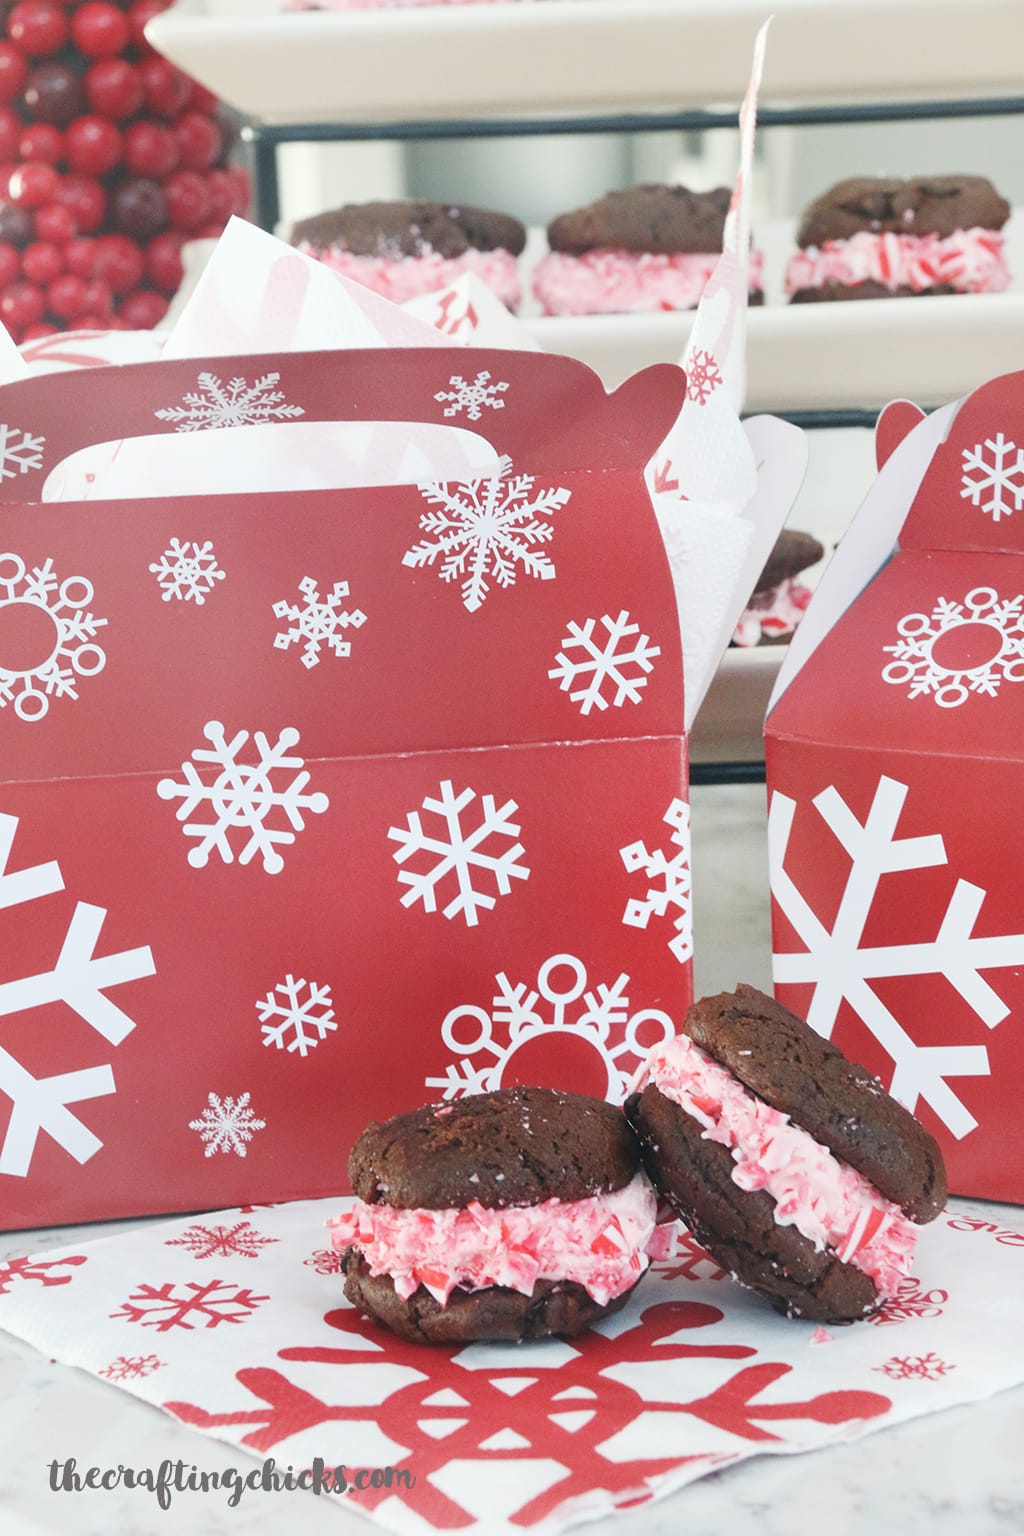 Peppermint Whoopie Pies Recipe - A yummy dessert for Christmas parties or a family get together.